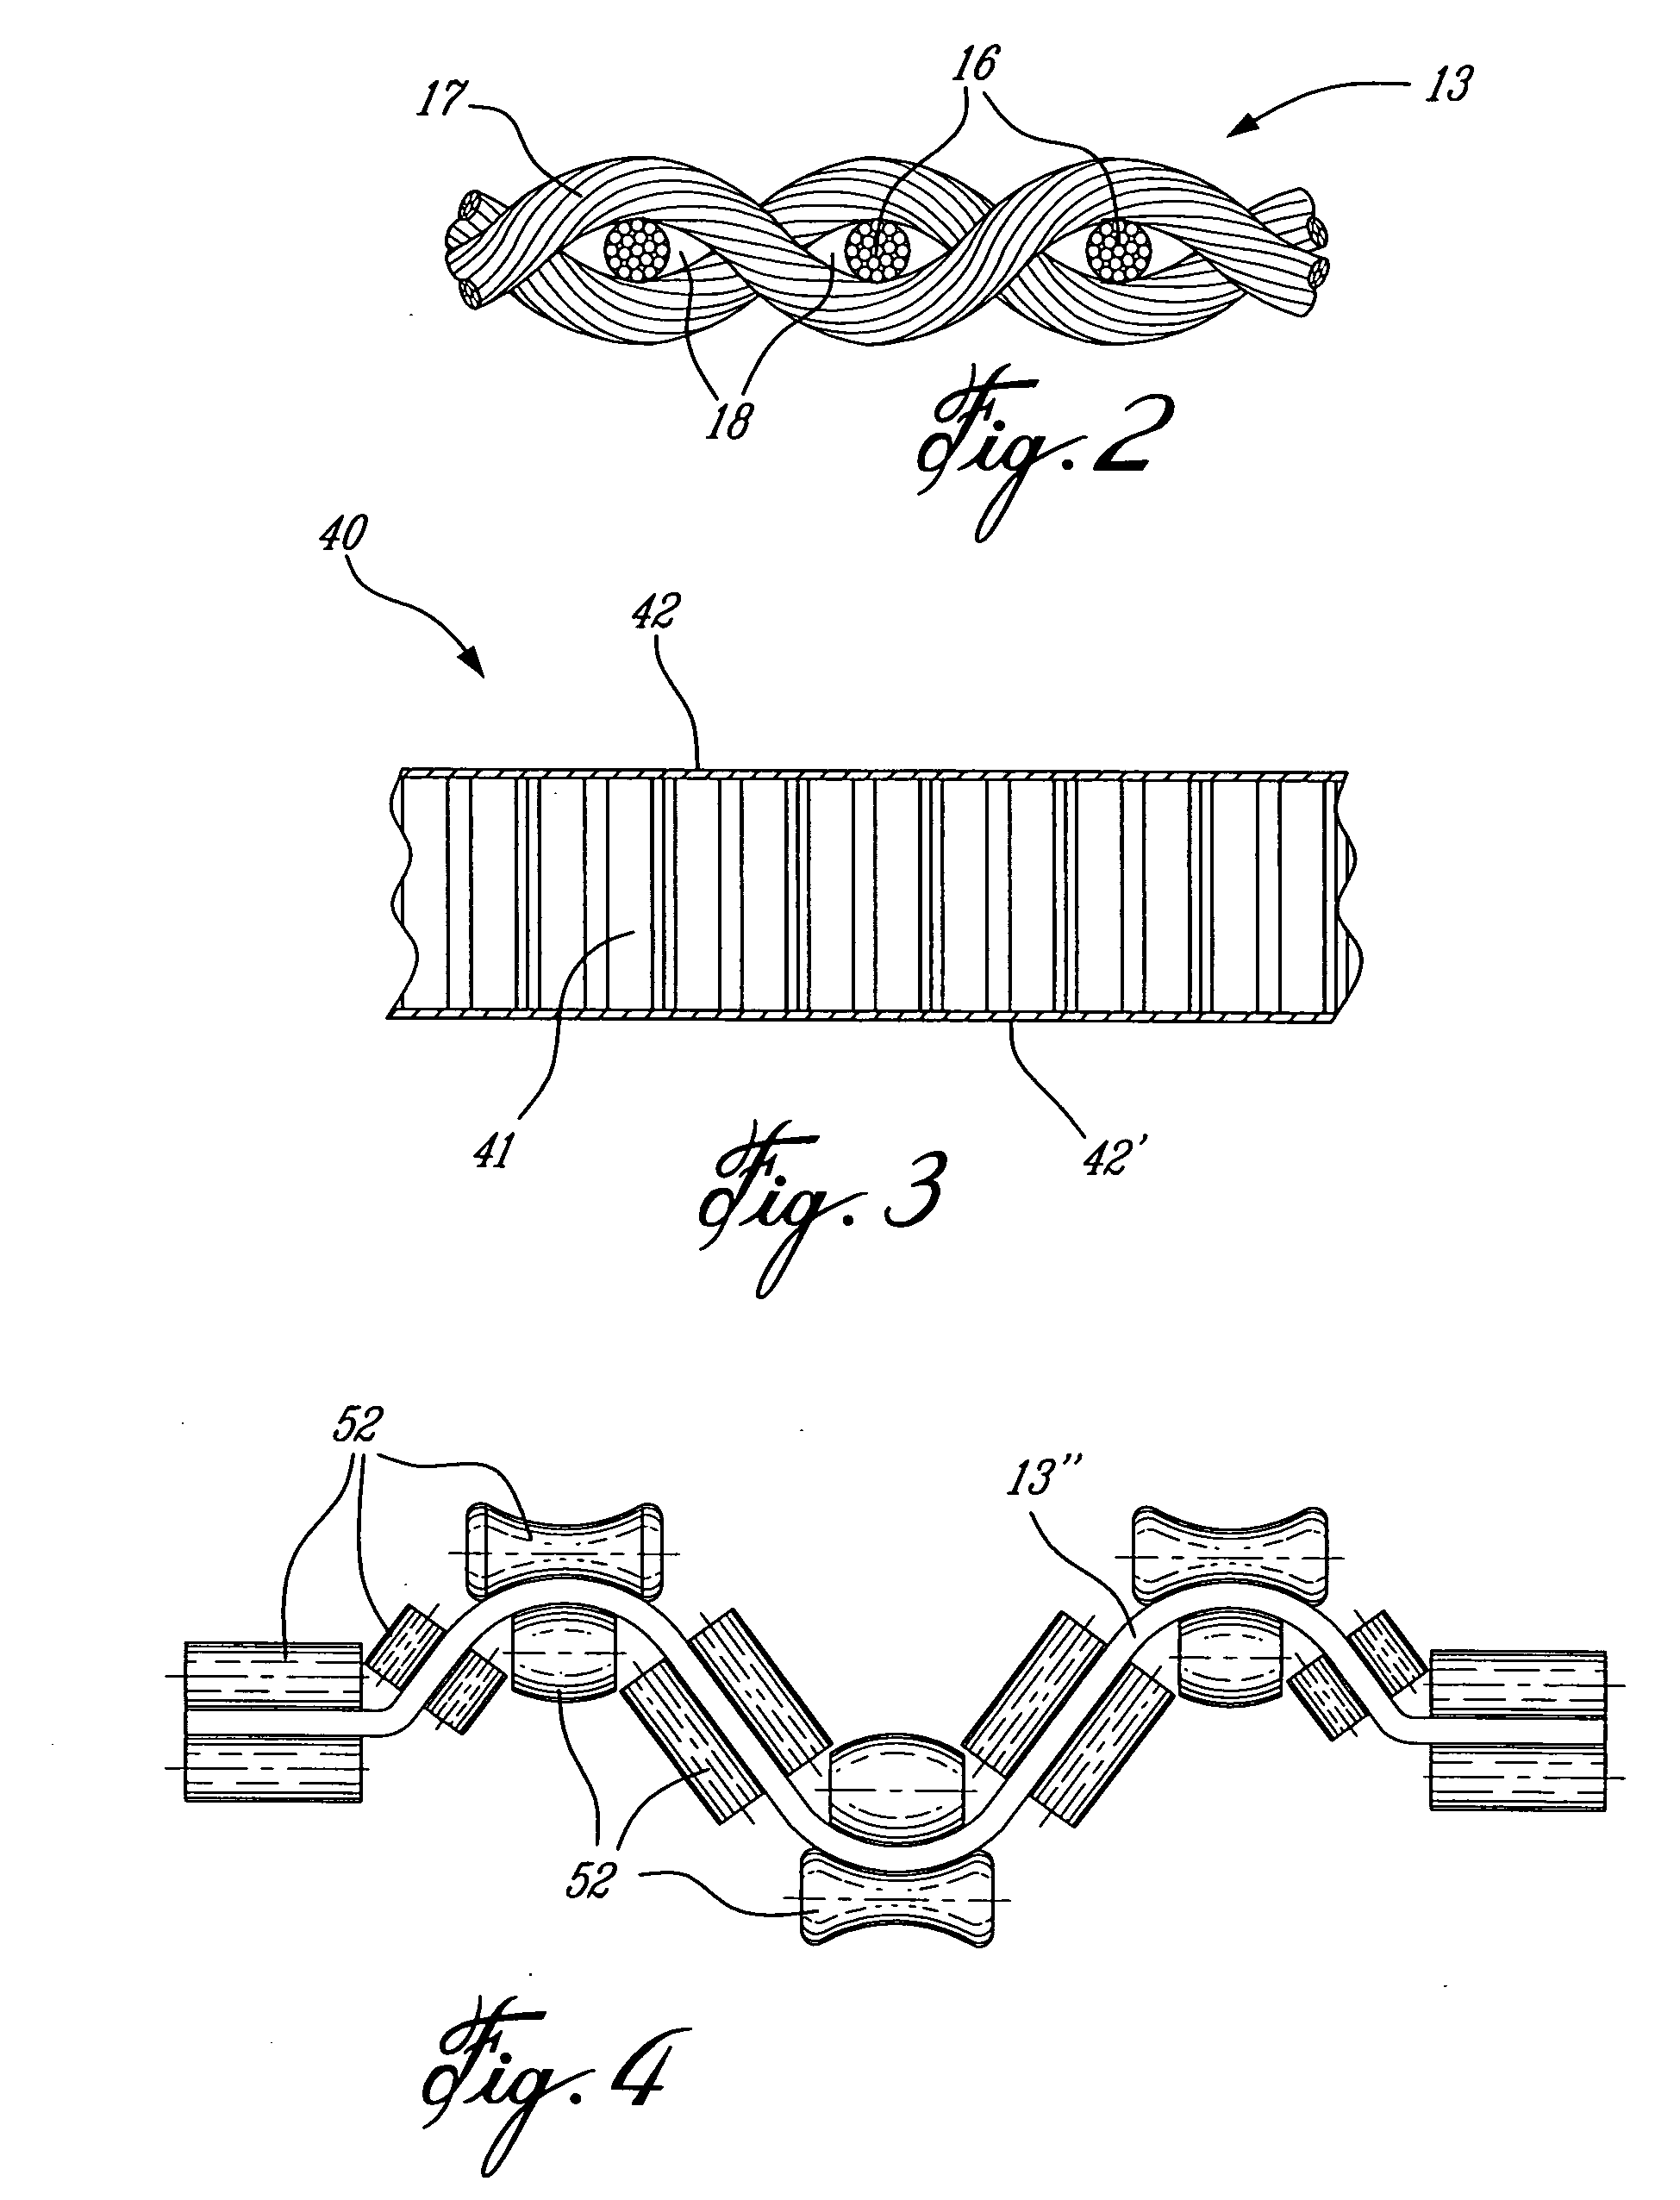 Process and machine for producing lightweight thermoplastic composite products in a continuous manner